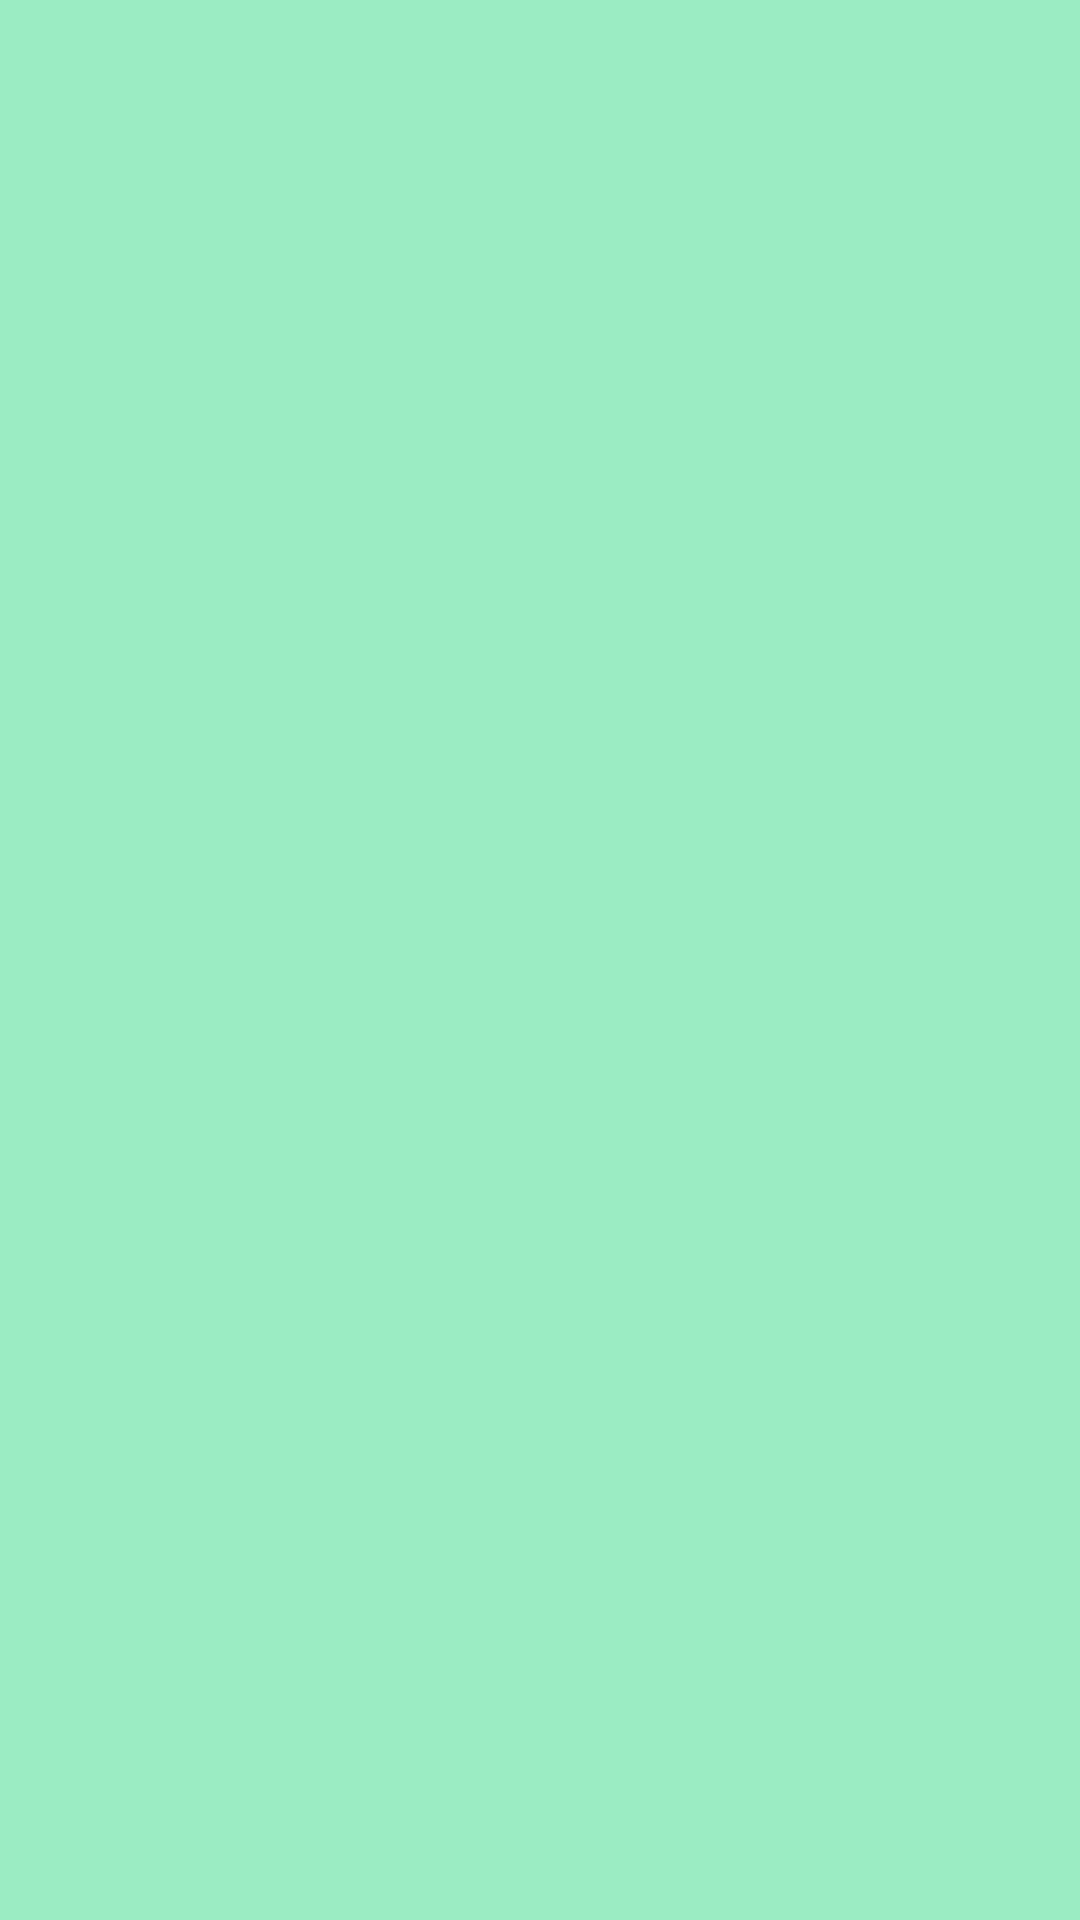 Mint Green iPhone Wallpaper with image resolution 1080x1920 pixel. You can make this wallpaper for your iPhone 5, 6, 7, 8, X backgrounds, Mobile Screensaver, or iPad Lock Screen